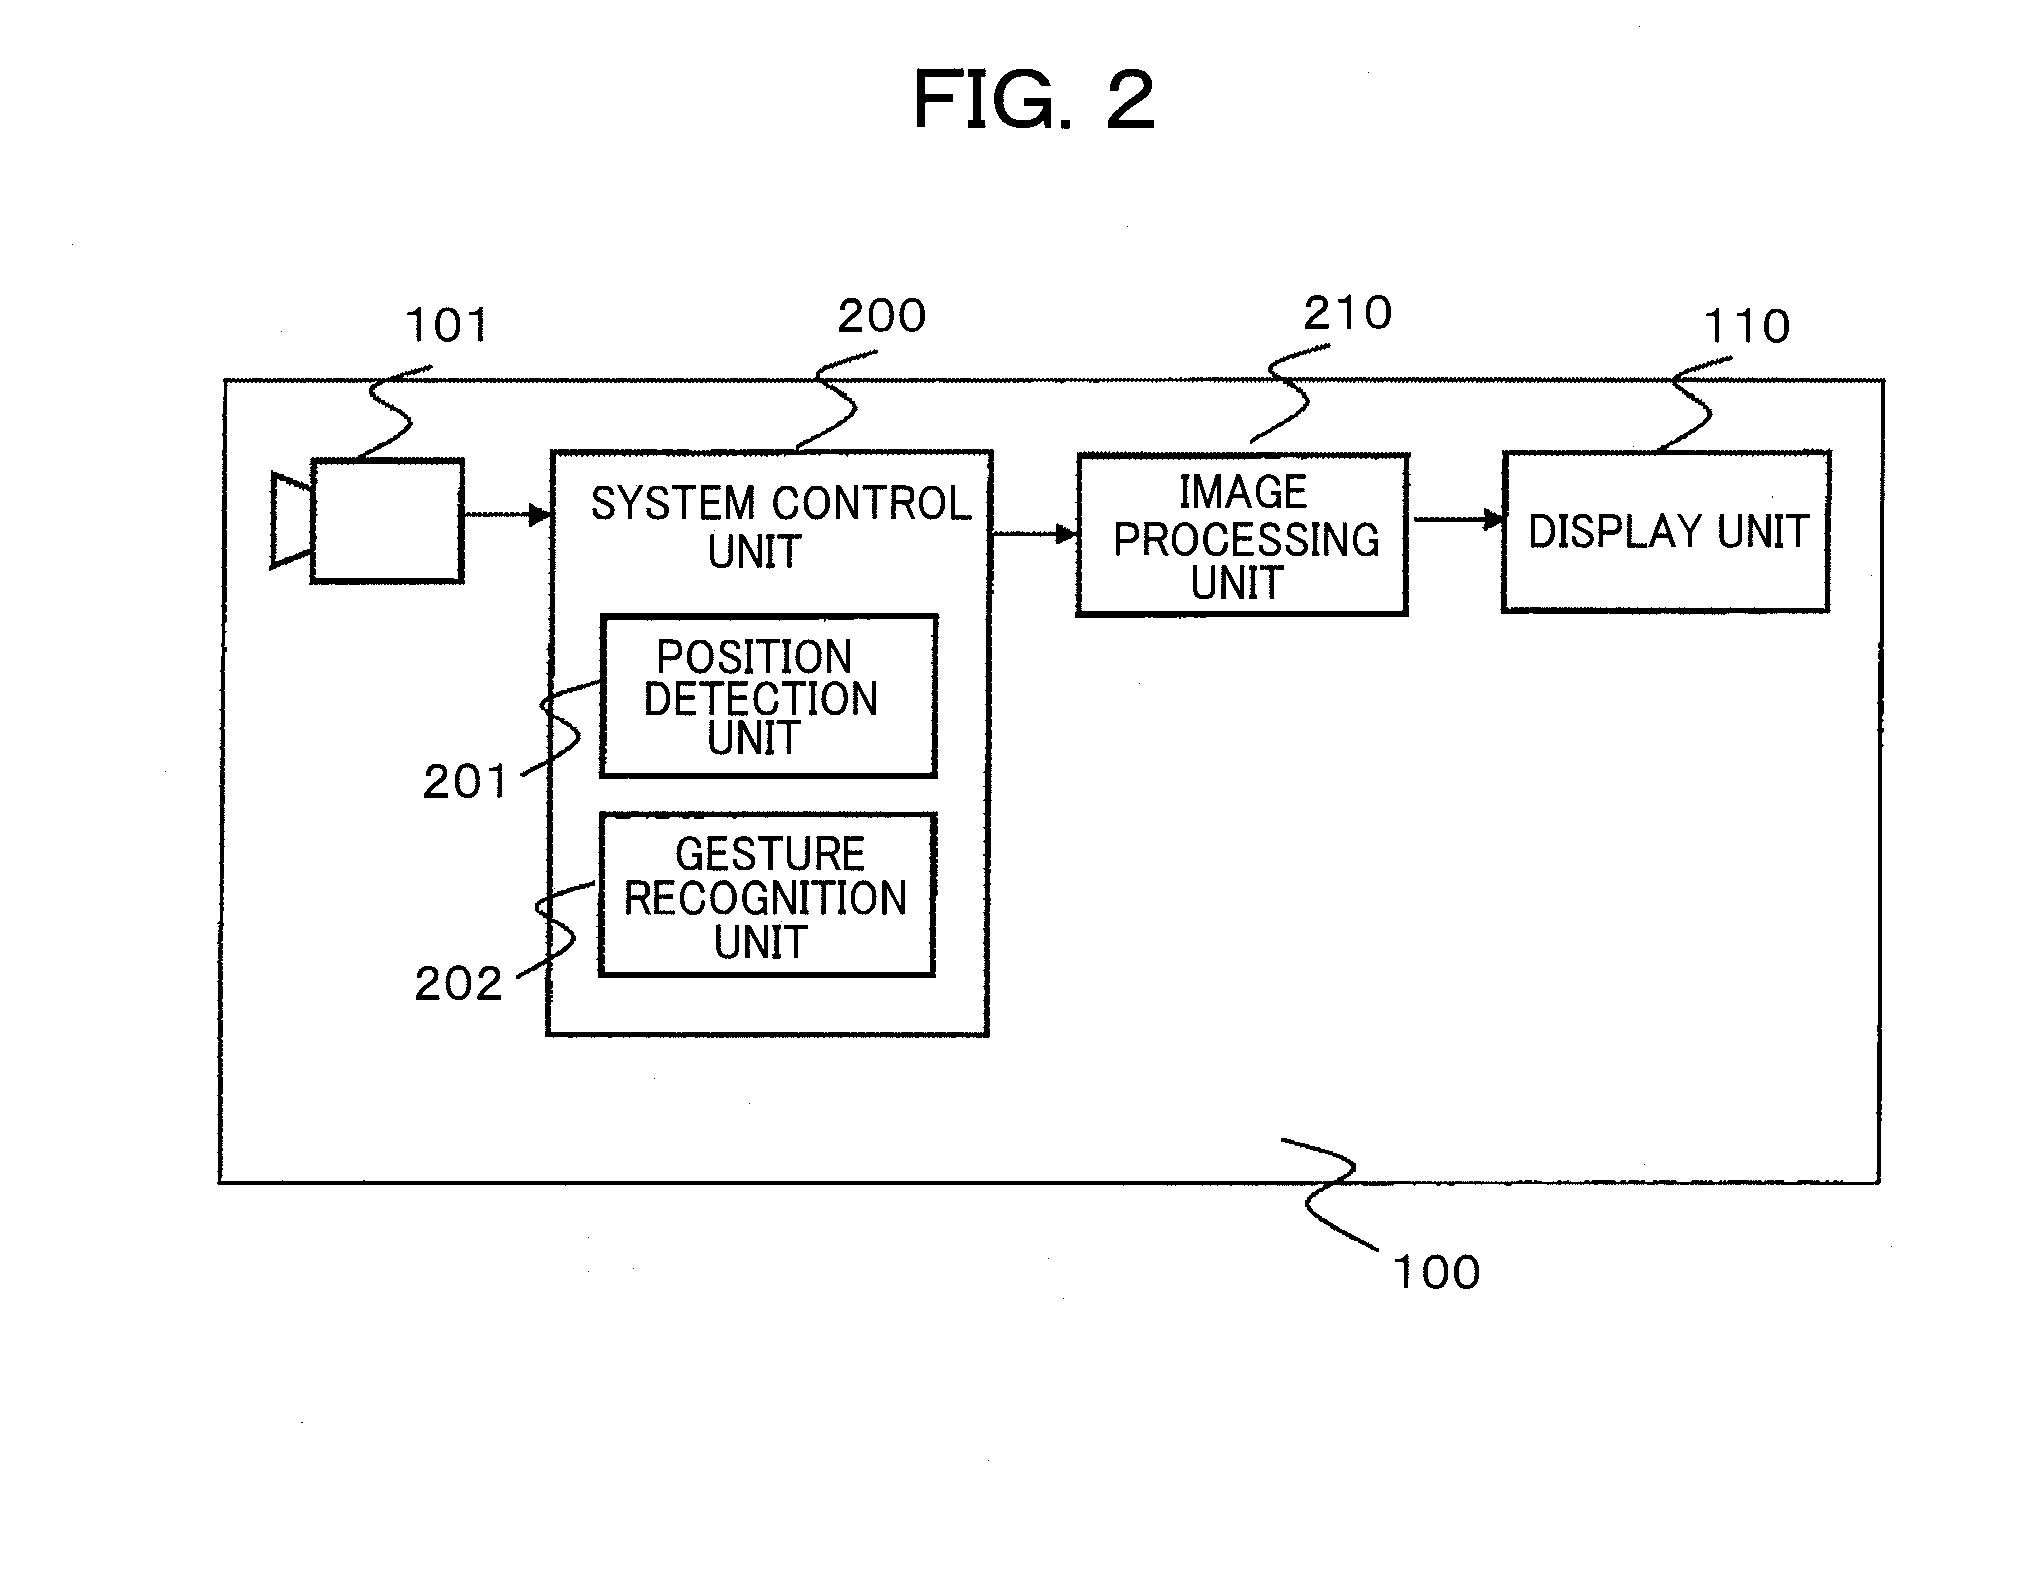 Image processing device and image display device